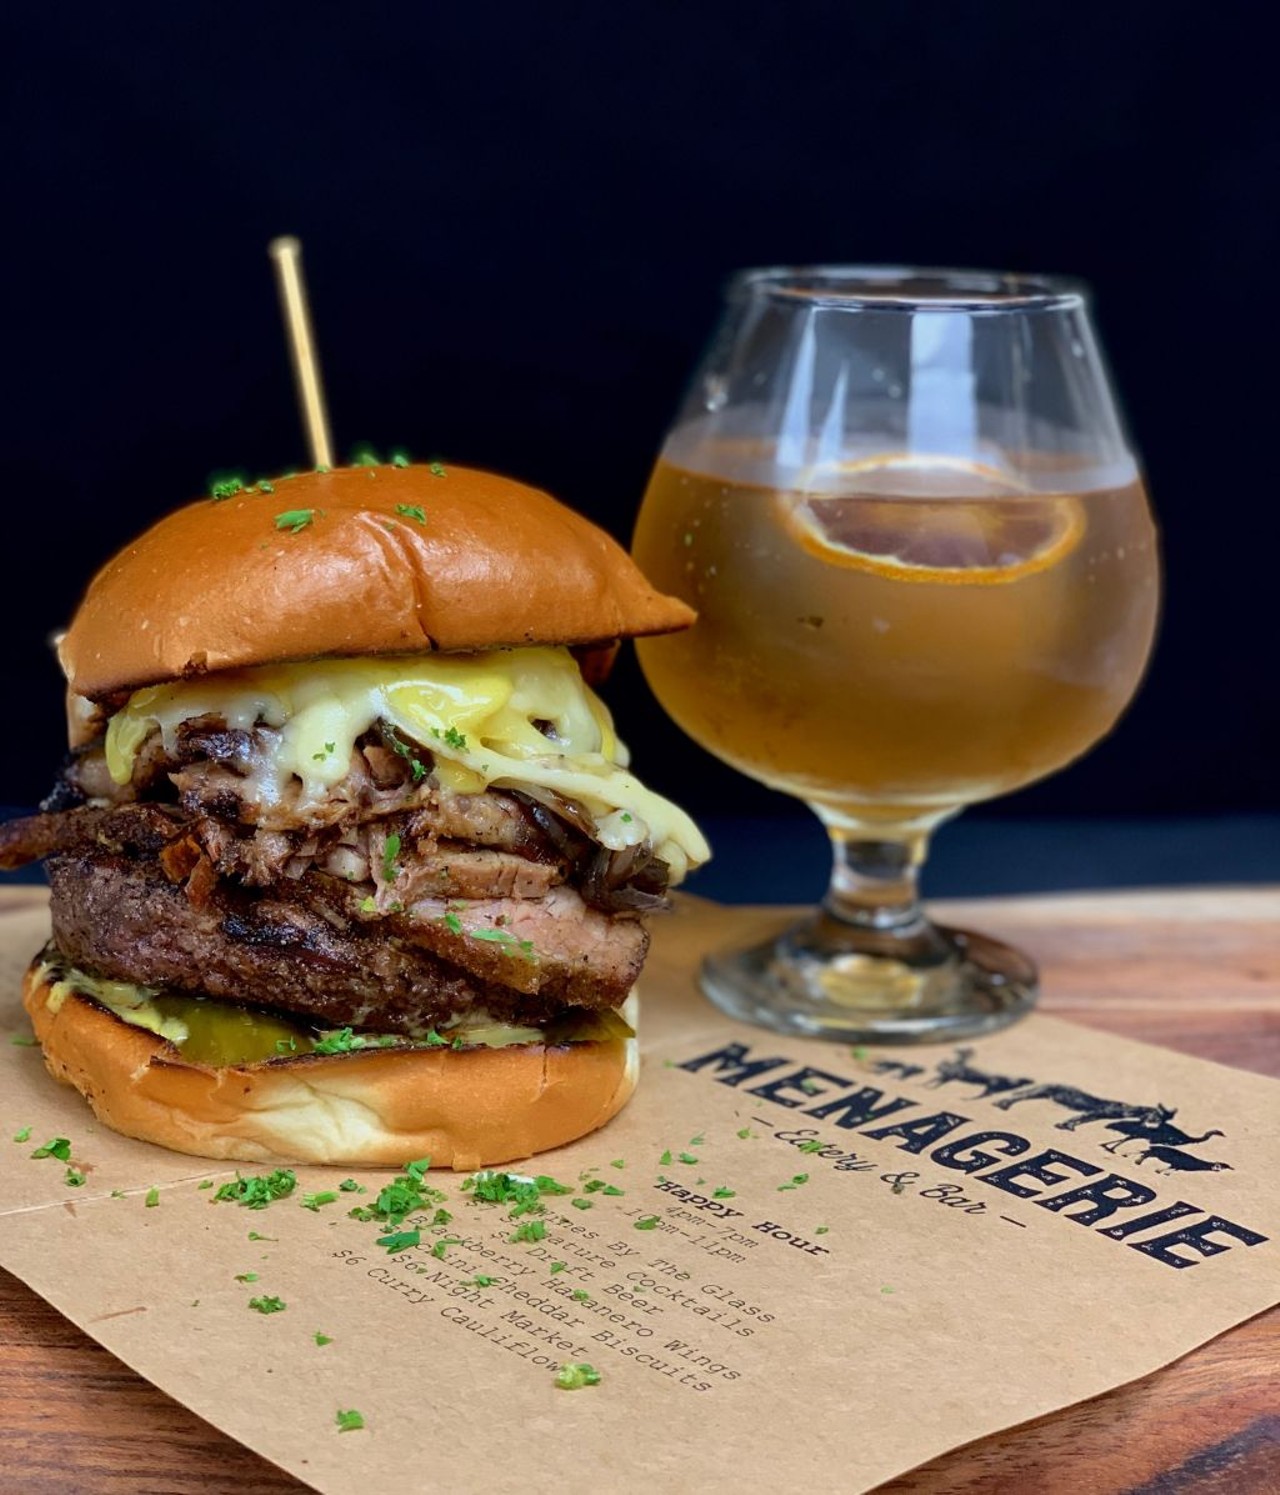 Menagerie Eatery & Bar:Bumble Bee Burger - 8oz. angus, white cheddar, yellow sriracha aioli, caramelized onions, house brisket & pickled English cucumbers on toasted brioche.